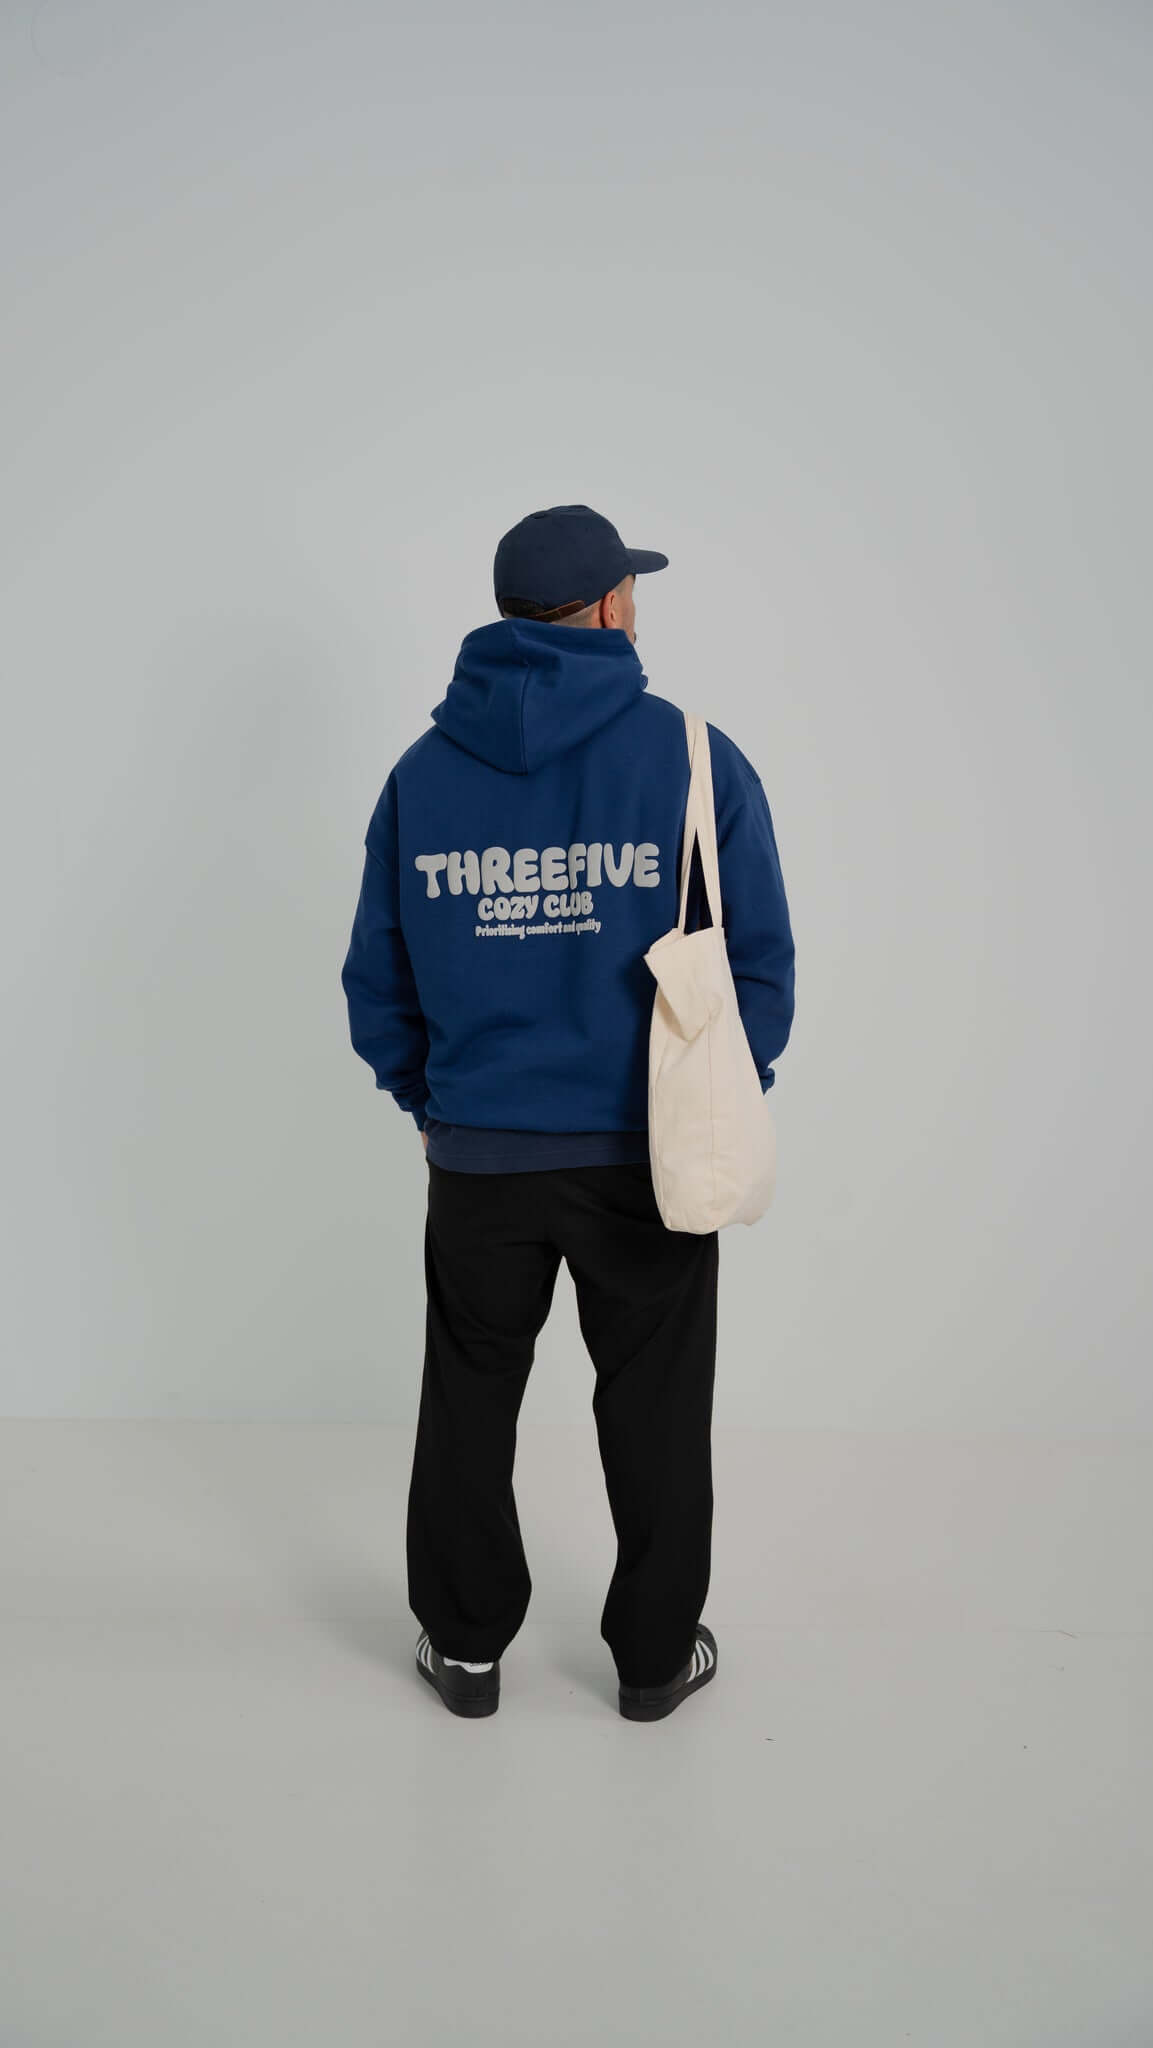 Male standing confidently wearing deep sea blue v2 hoodie, tote bag over shoulder